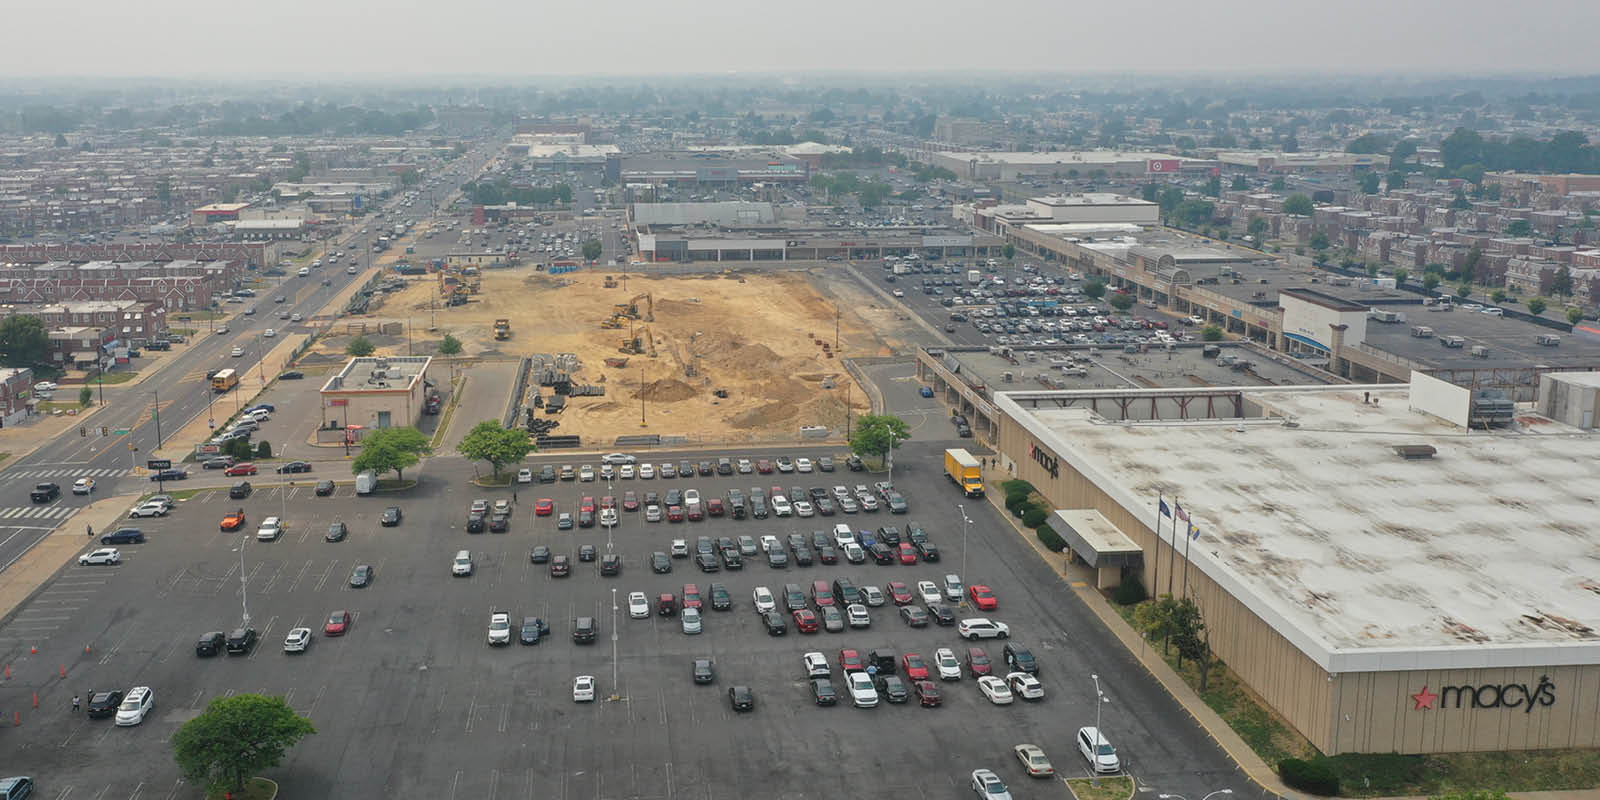 Aerial view of construction at strip mall redevelopment